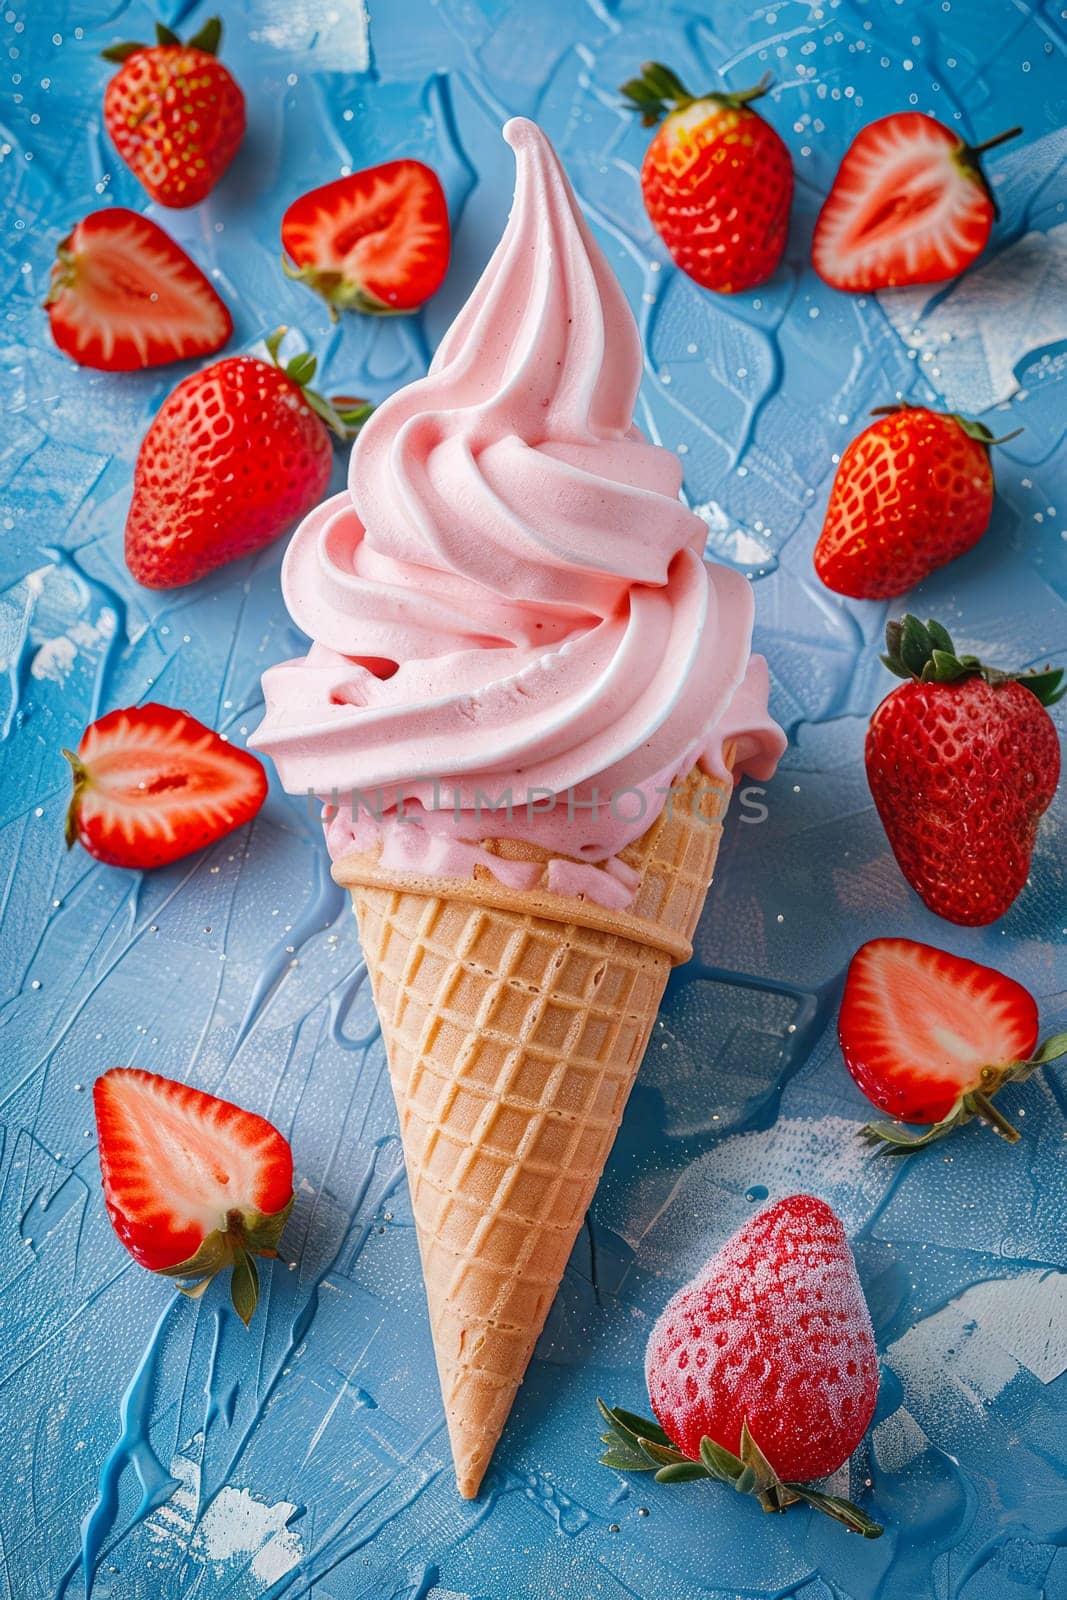 Strawberry ice cream and strawberries on blue background.